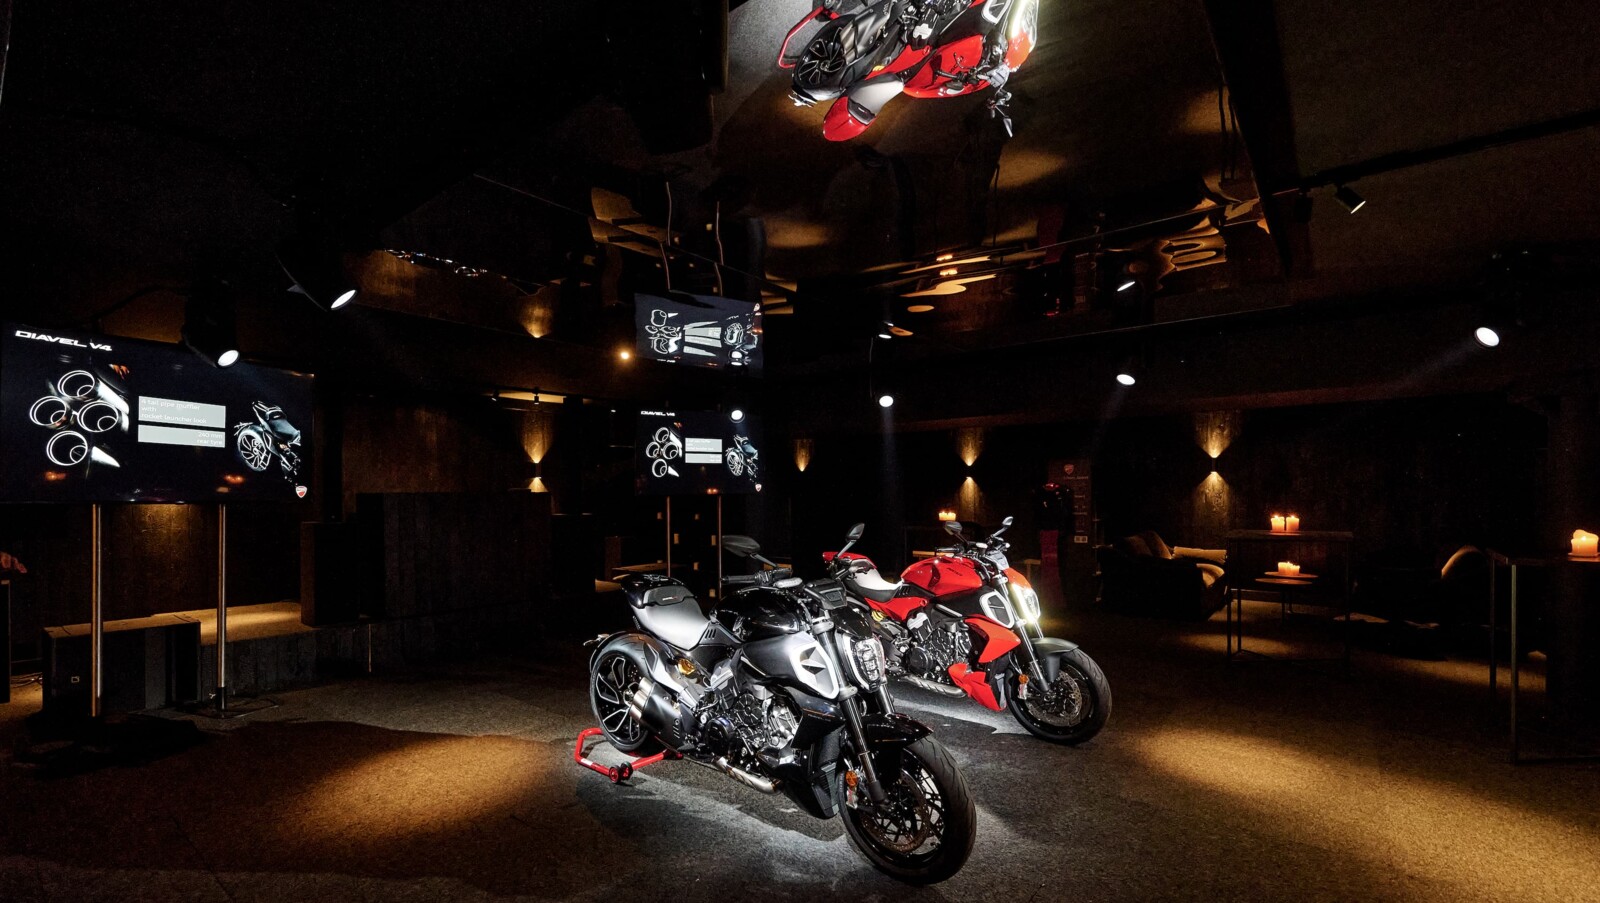 At the Ducati Design Night in New York, the Italian manufacturer presented the invited guests with the Diavel V4, one of the most eagerly awaited new models of this season - and paid special attention to the design of a motorbike family that has become a real style icon over the years. The location in the city that never sleeps: Moonlight Studios.